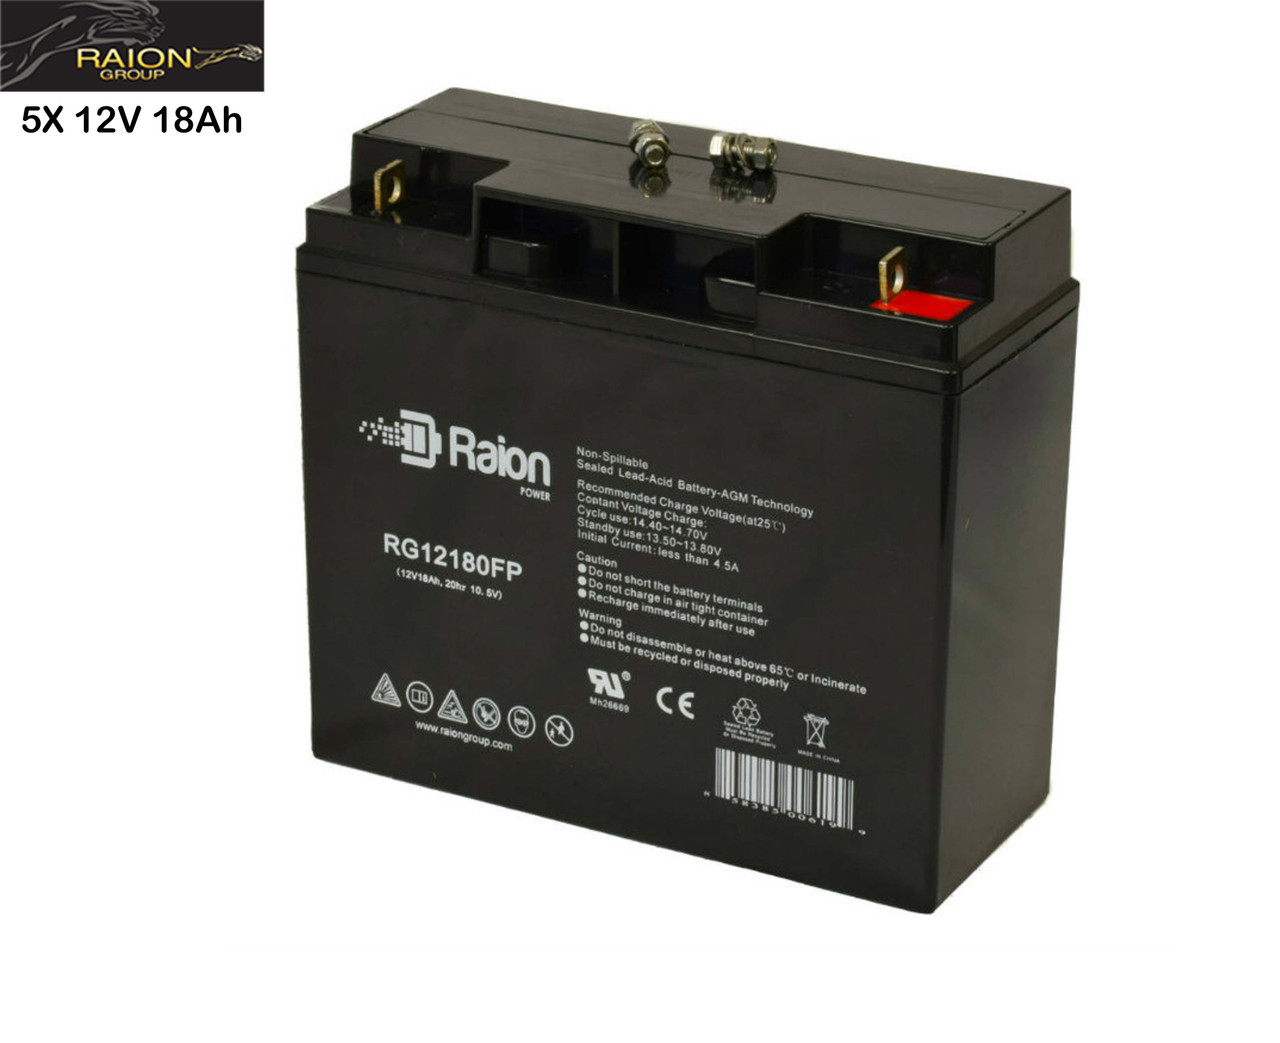 Raion Power Replacement 12V 18Ah Battery for Daymak Roadstar - 5 Pack